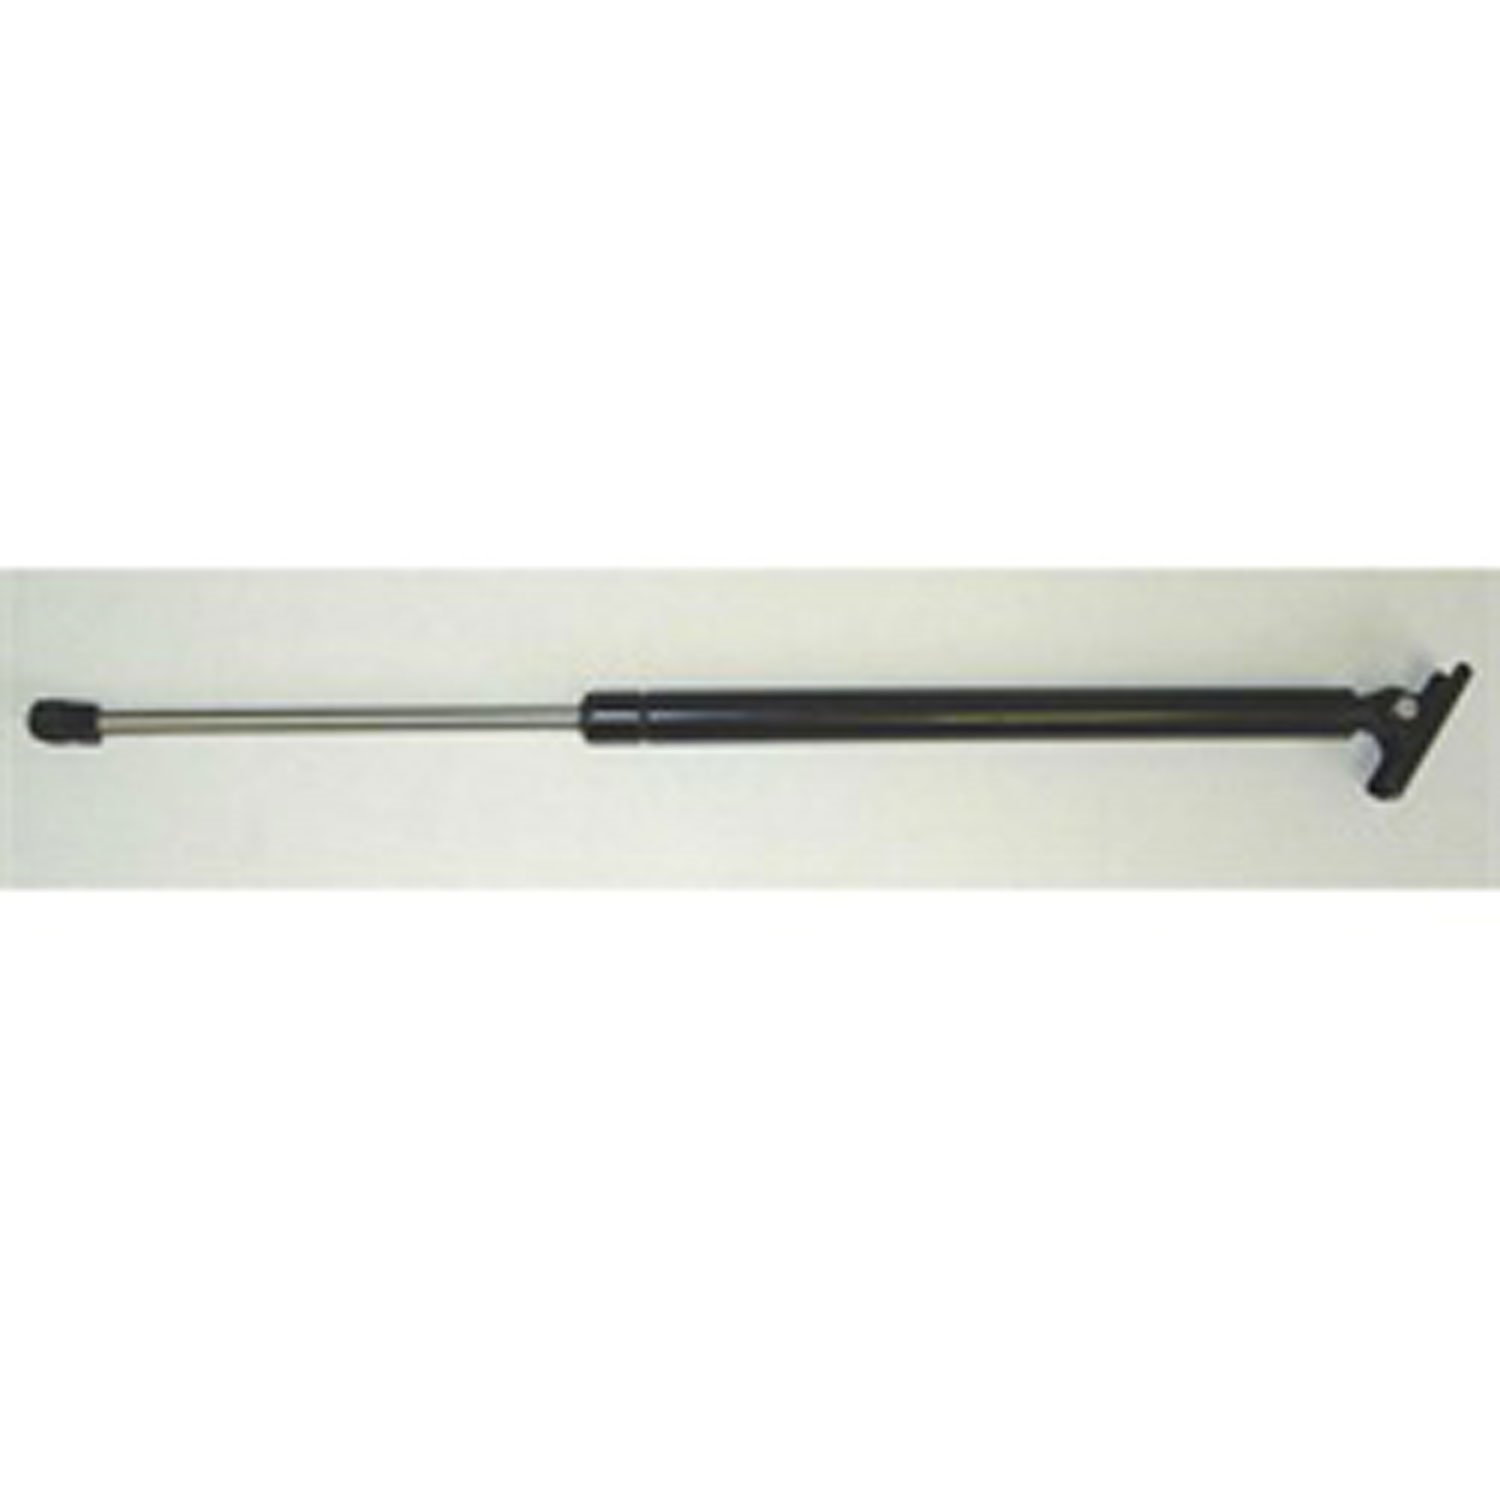 Replacement gas strut from Omix-ADA, Fits liftgate on 97-01 Jeep Cherokee XJ, Fits left or right side.